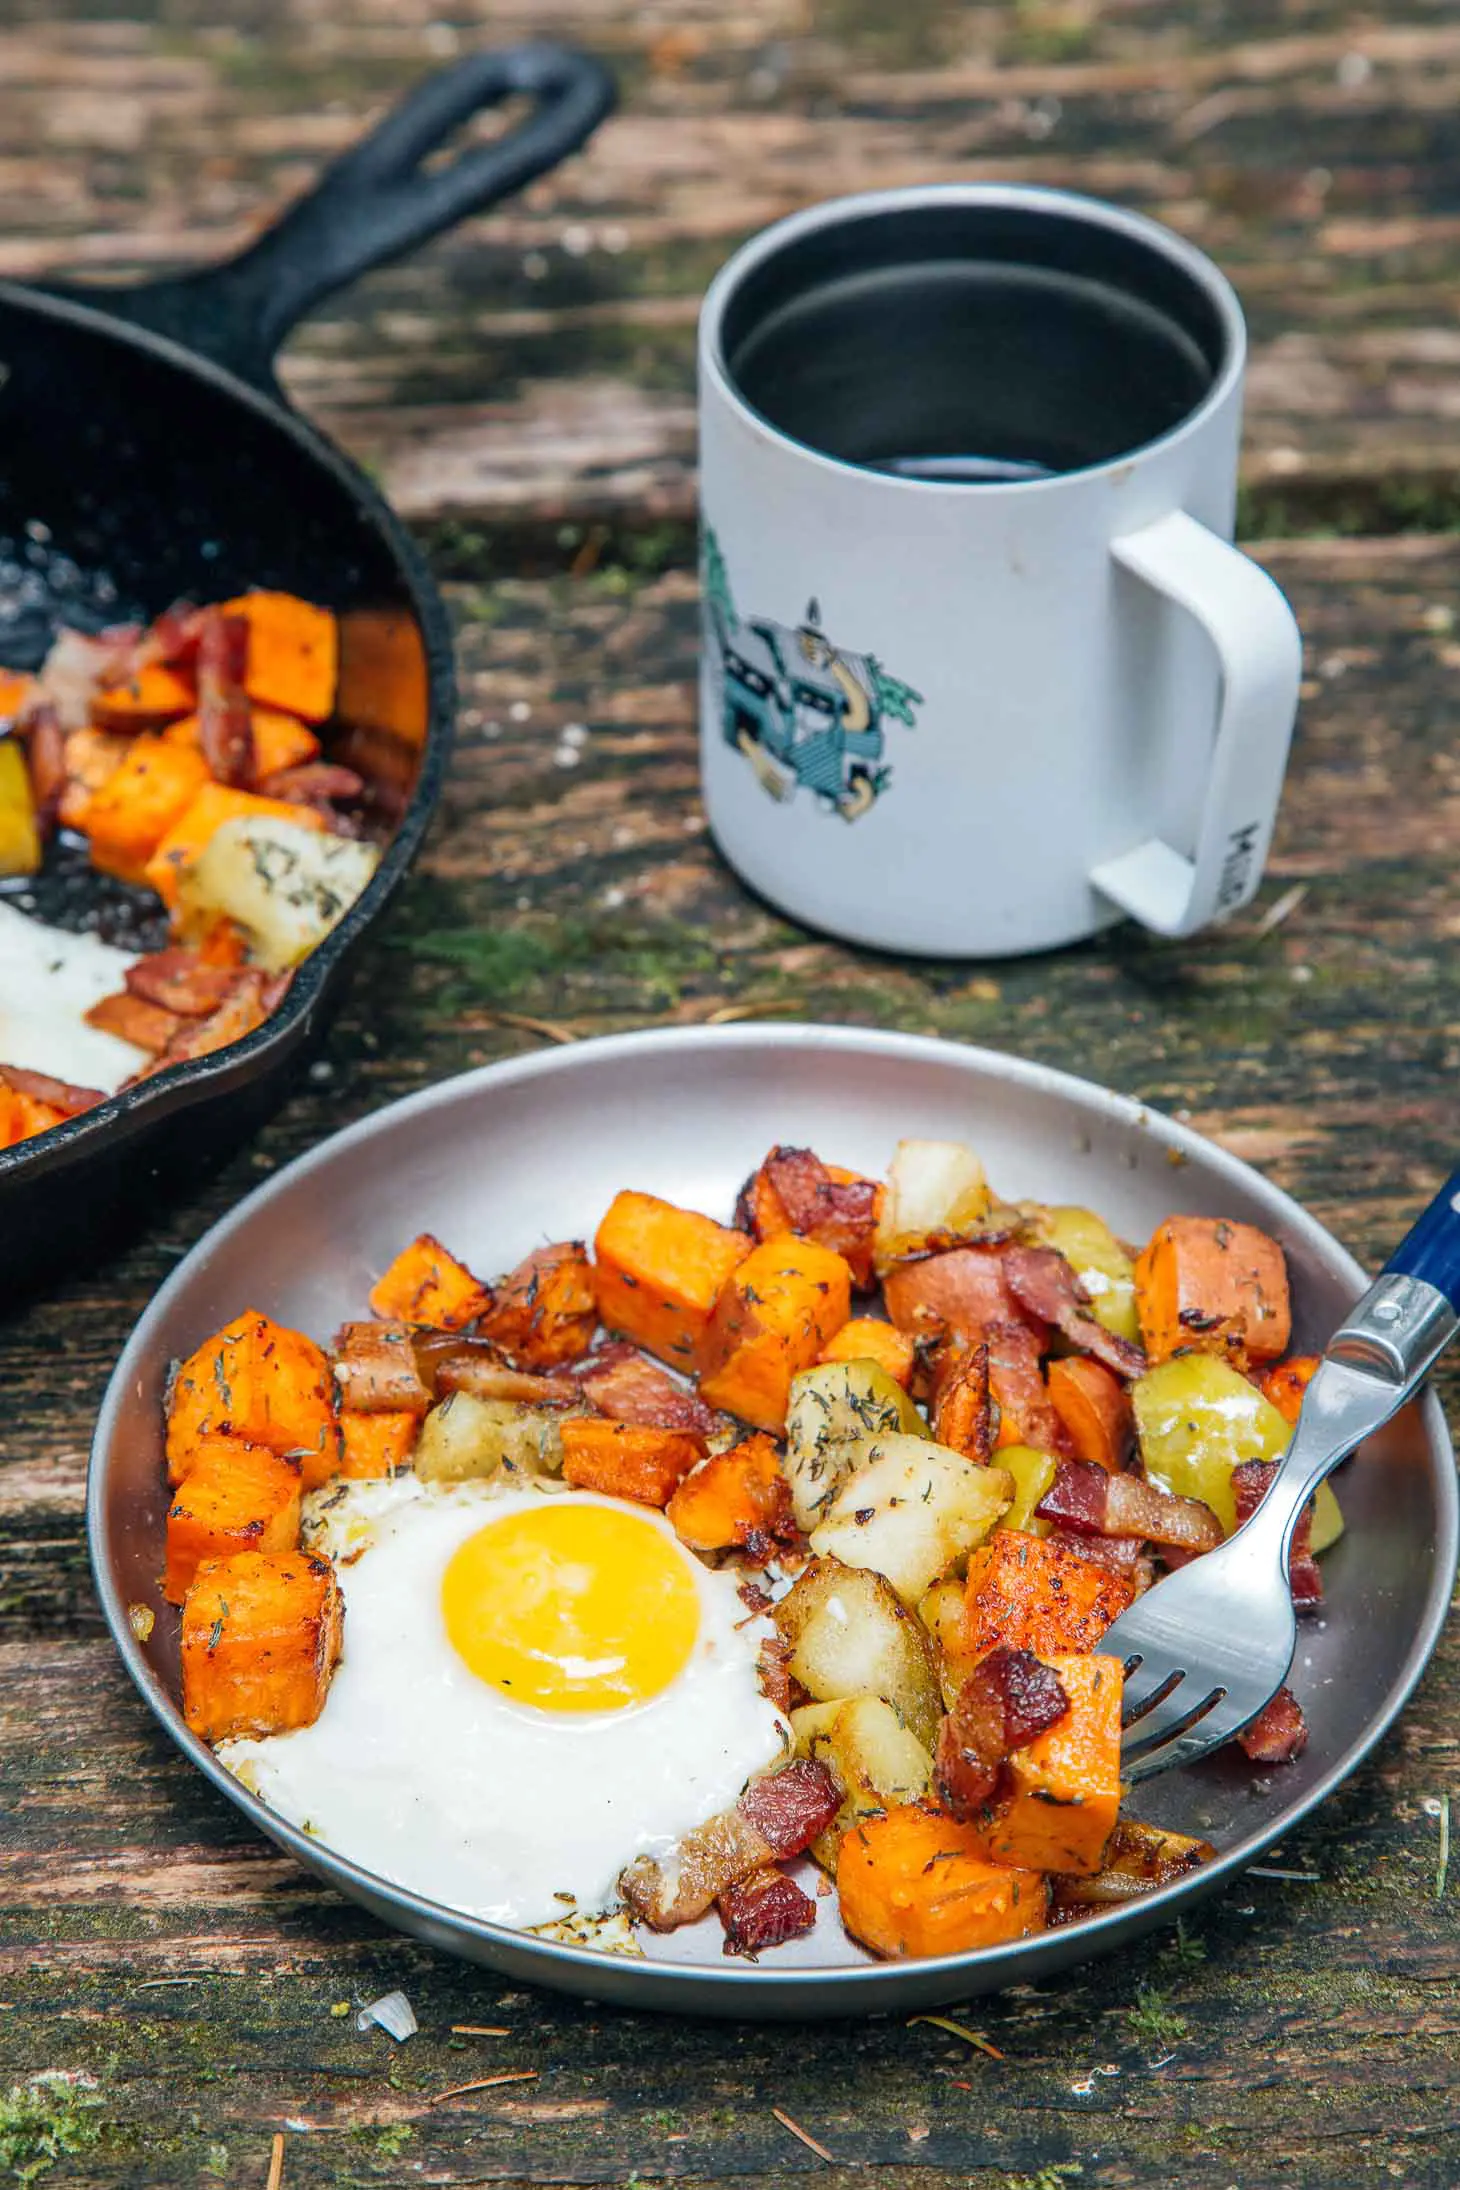 Apple and sweet potato hash & a fried egg on a silver plate on a camp table with a cup of coffee in the background.